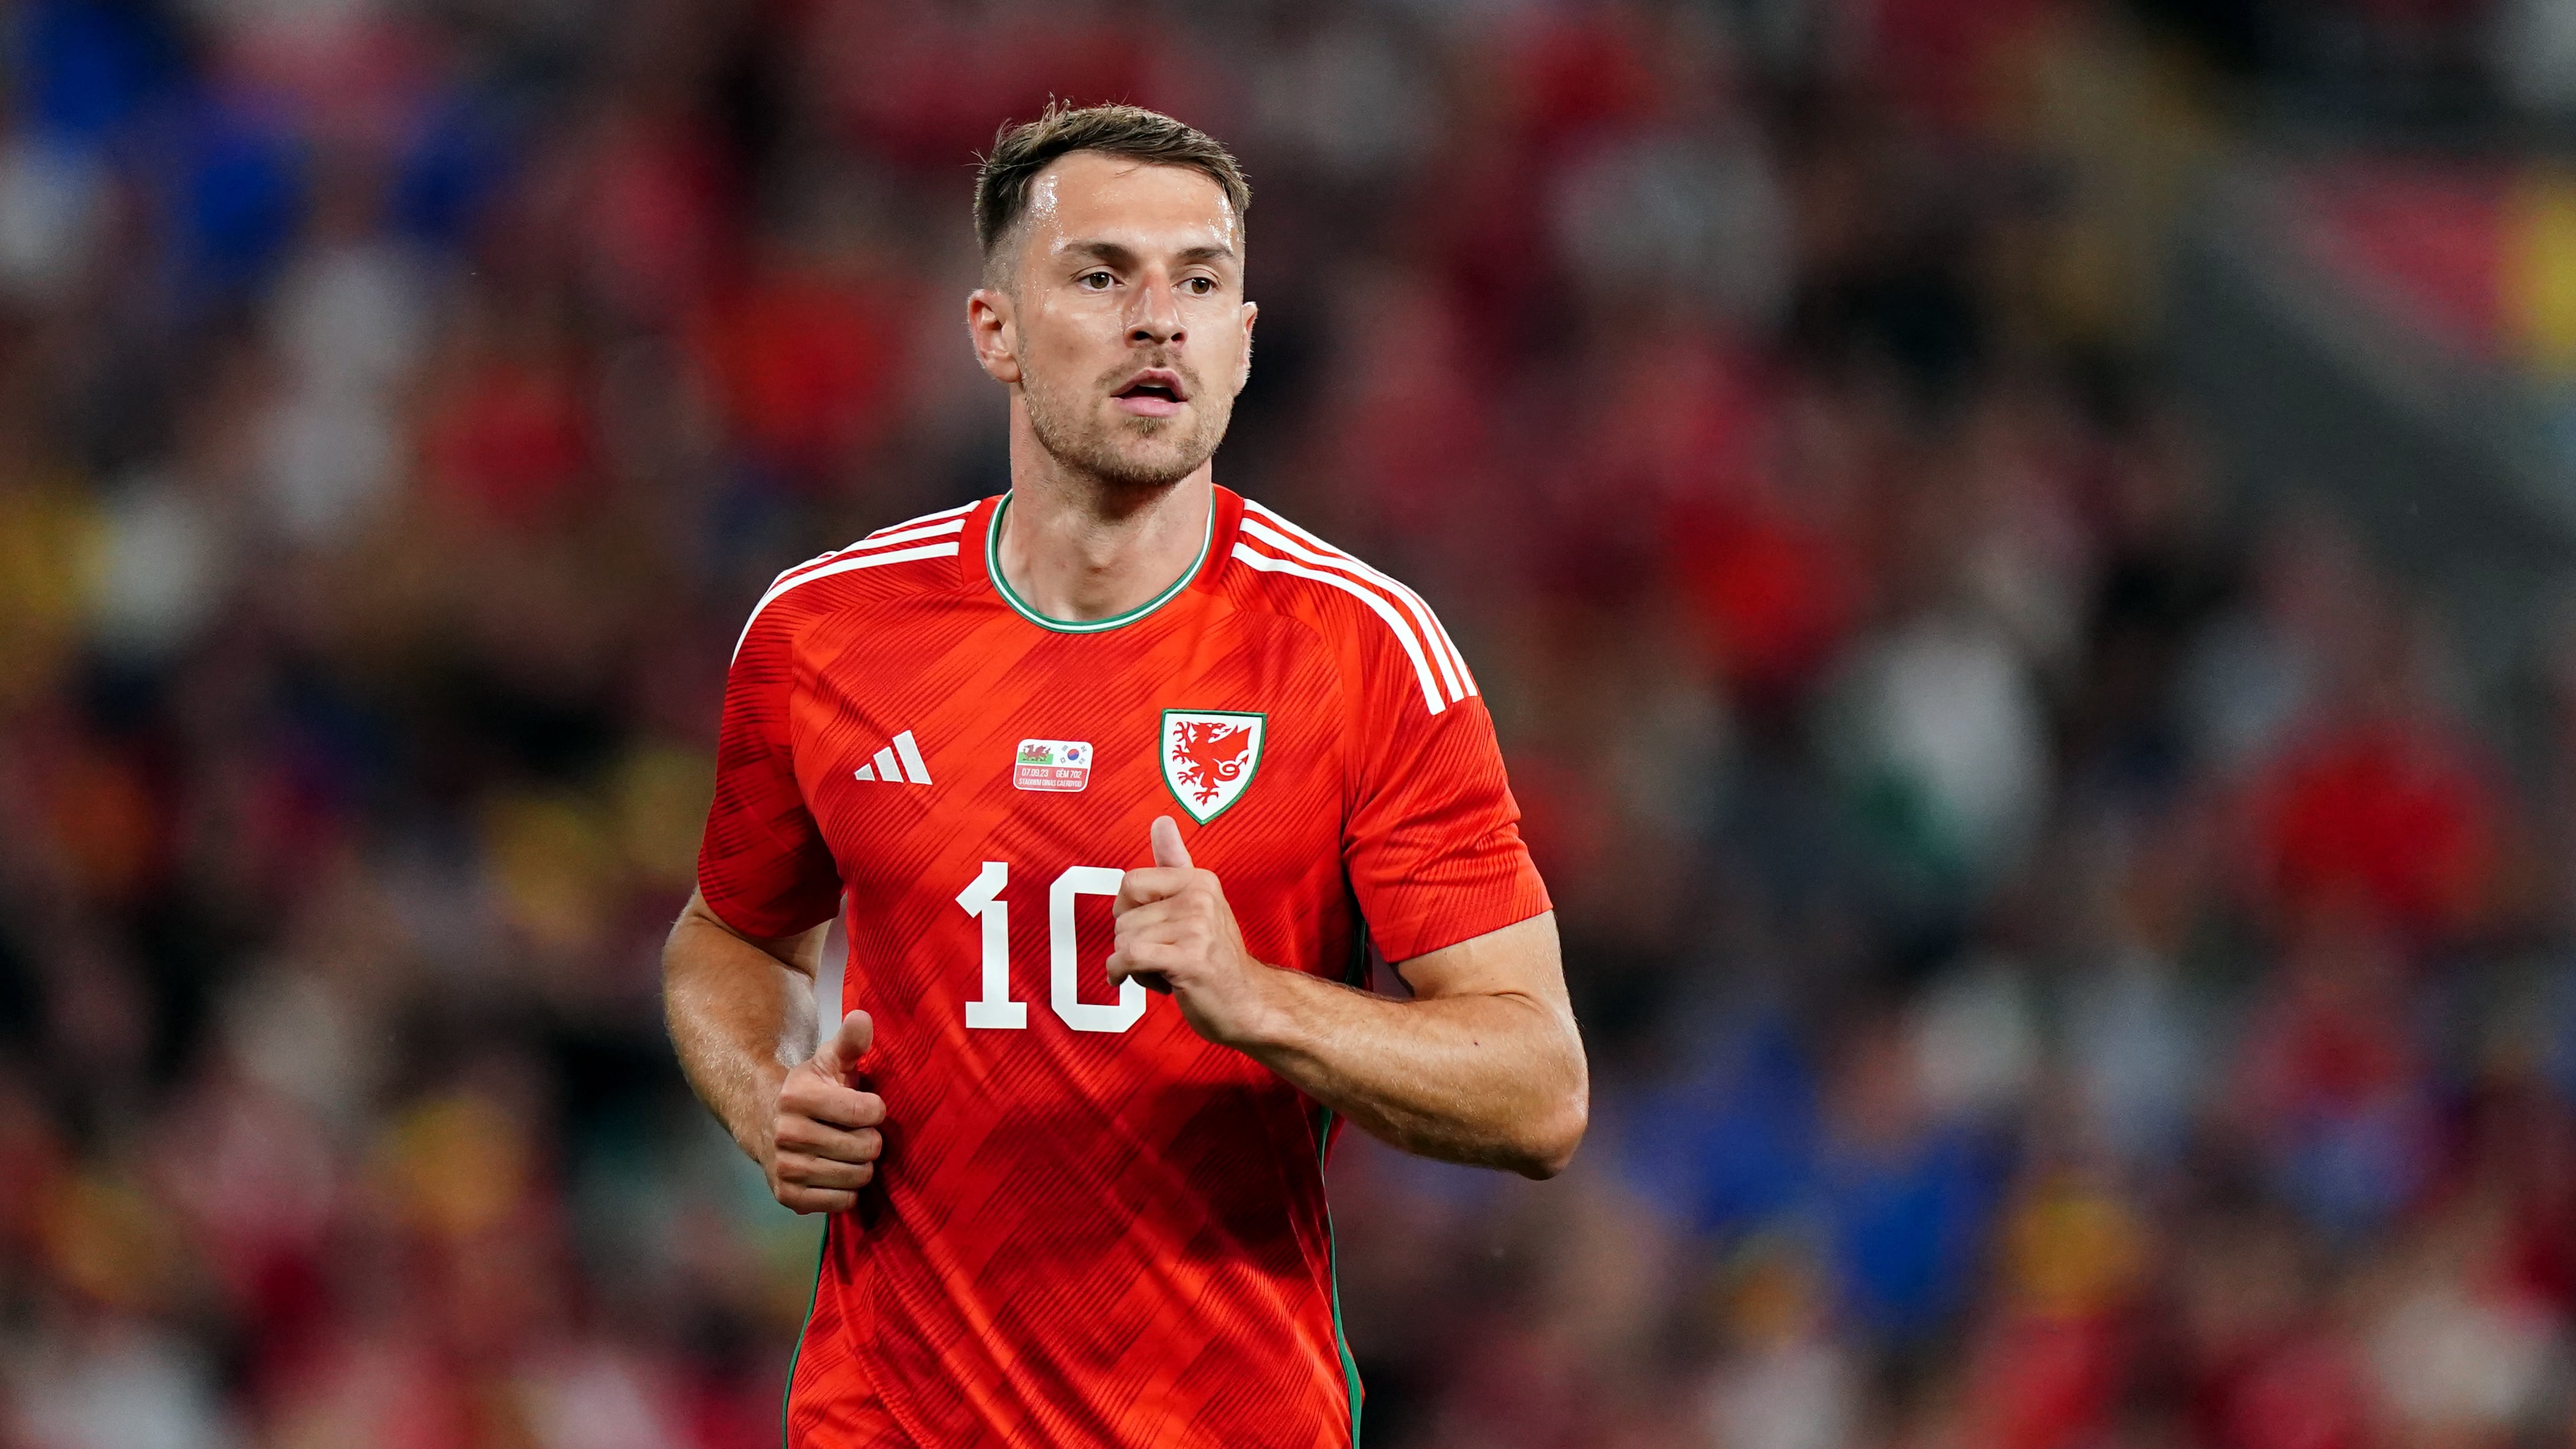 Skipper Aaron Ramsey will miss Wales’ summer friendlies against Gibraltar and Slovakia